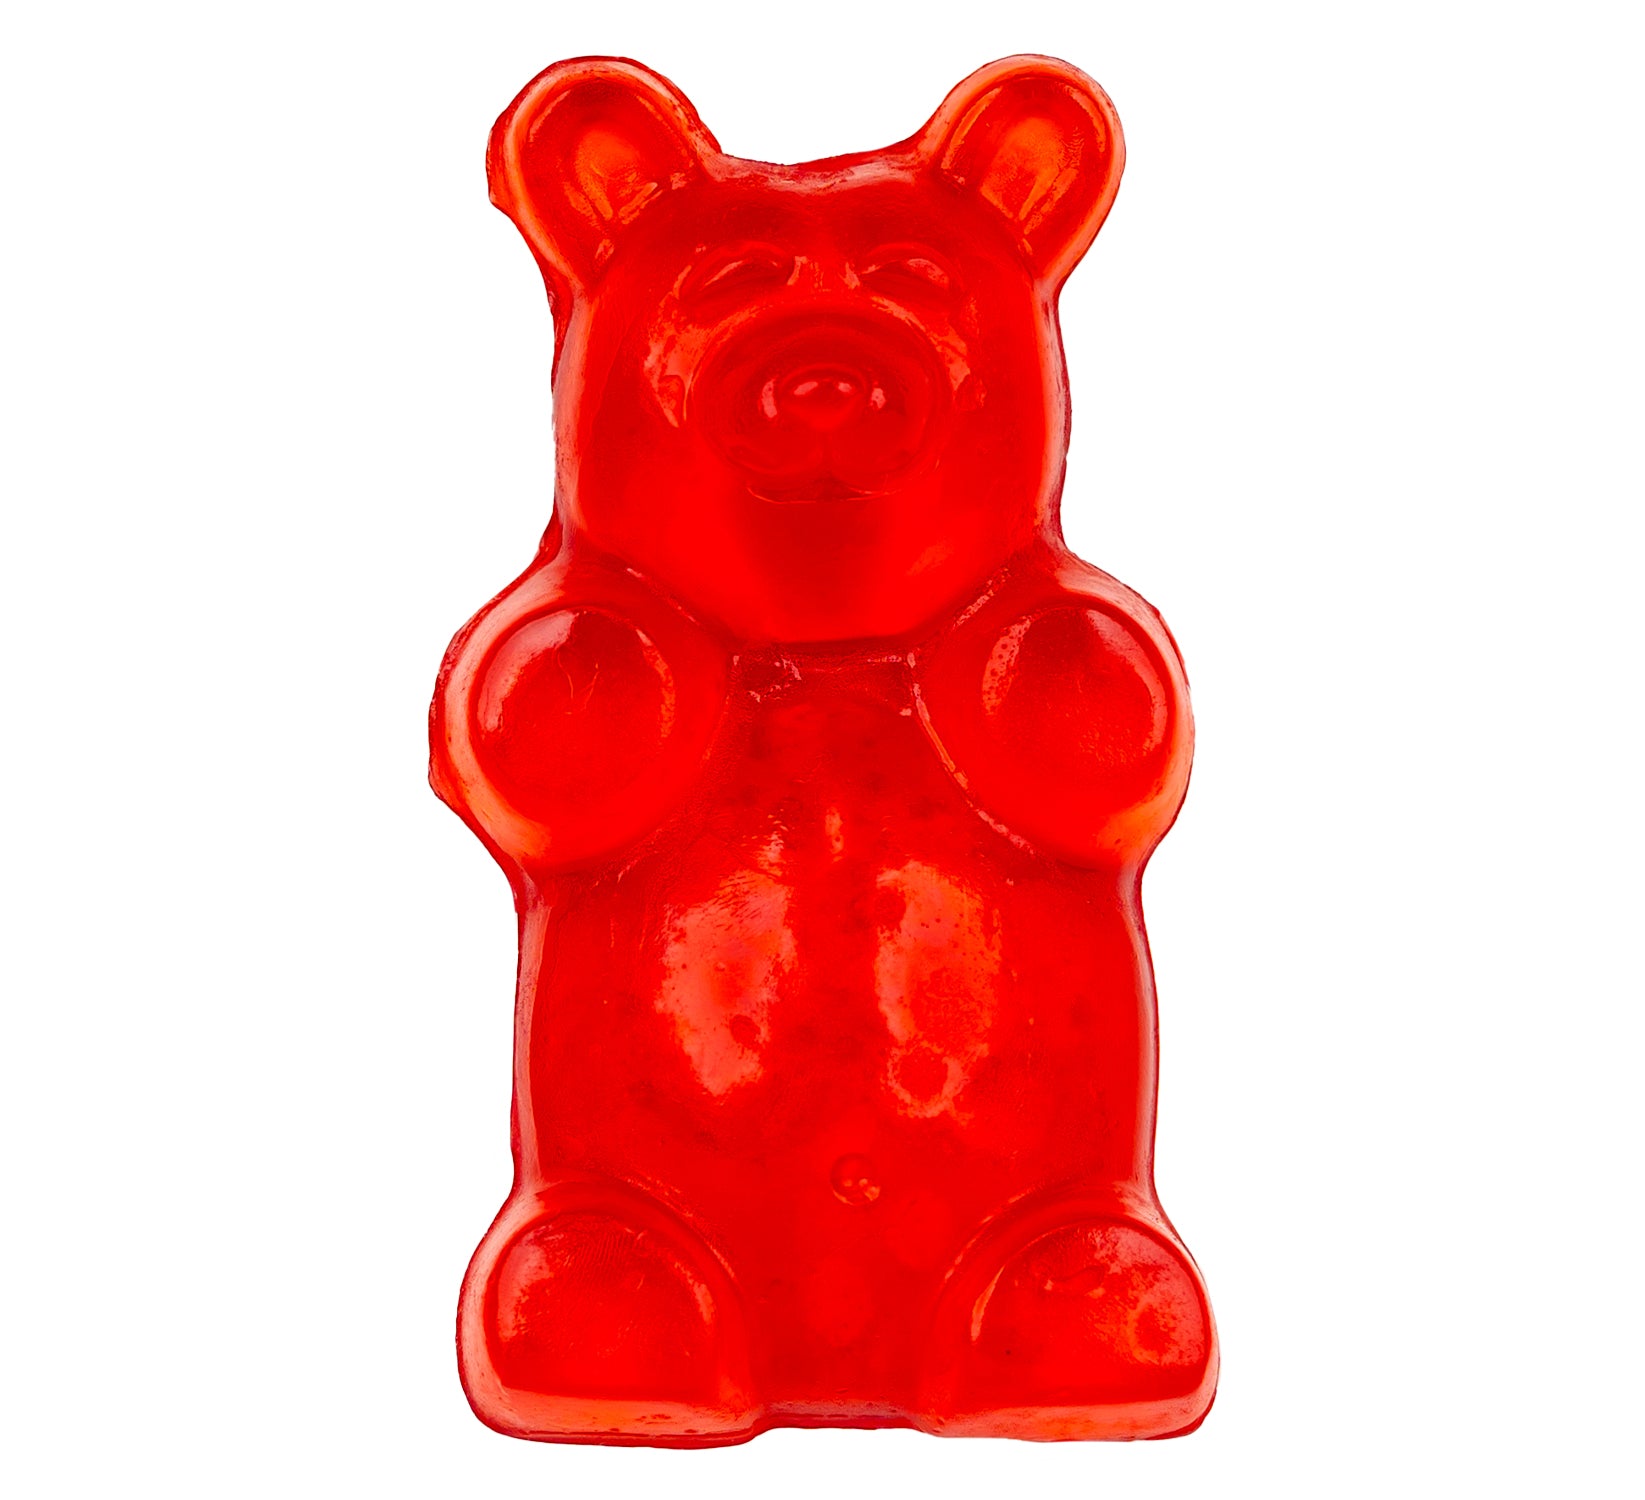 How much are giant gummy bears